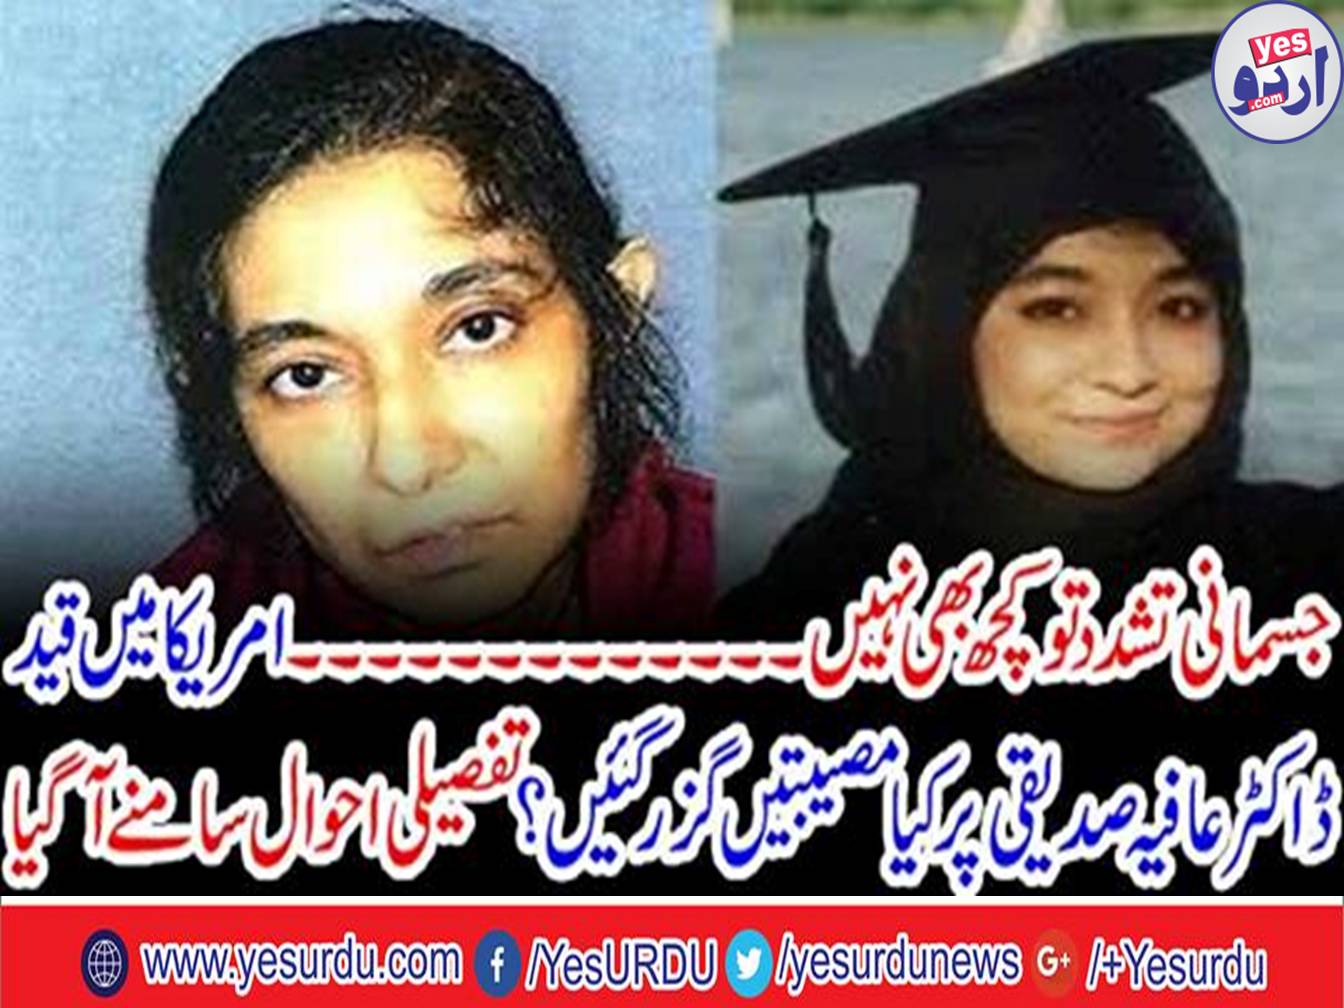 Jail officials threatens to Dr Aafia Siddiqui threaten physically harassment threats and explosion of force to use semi-unconsciousness medicine